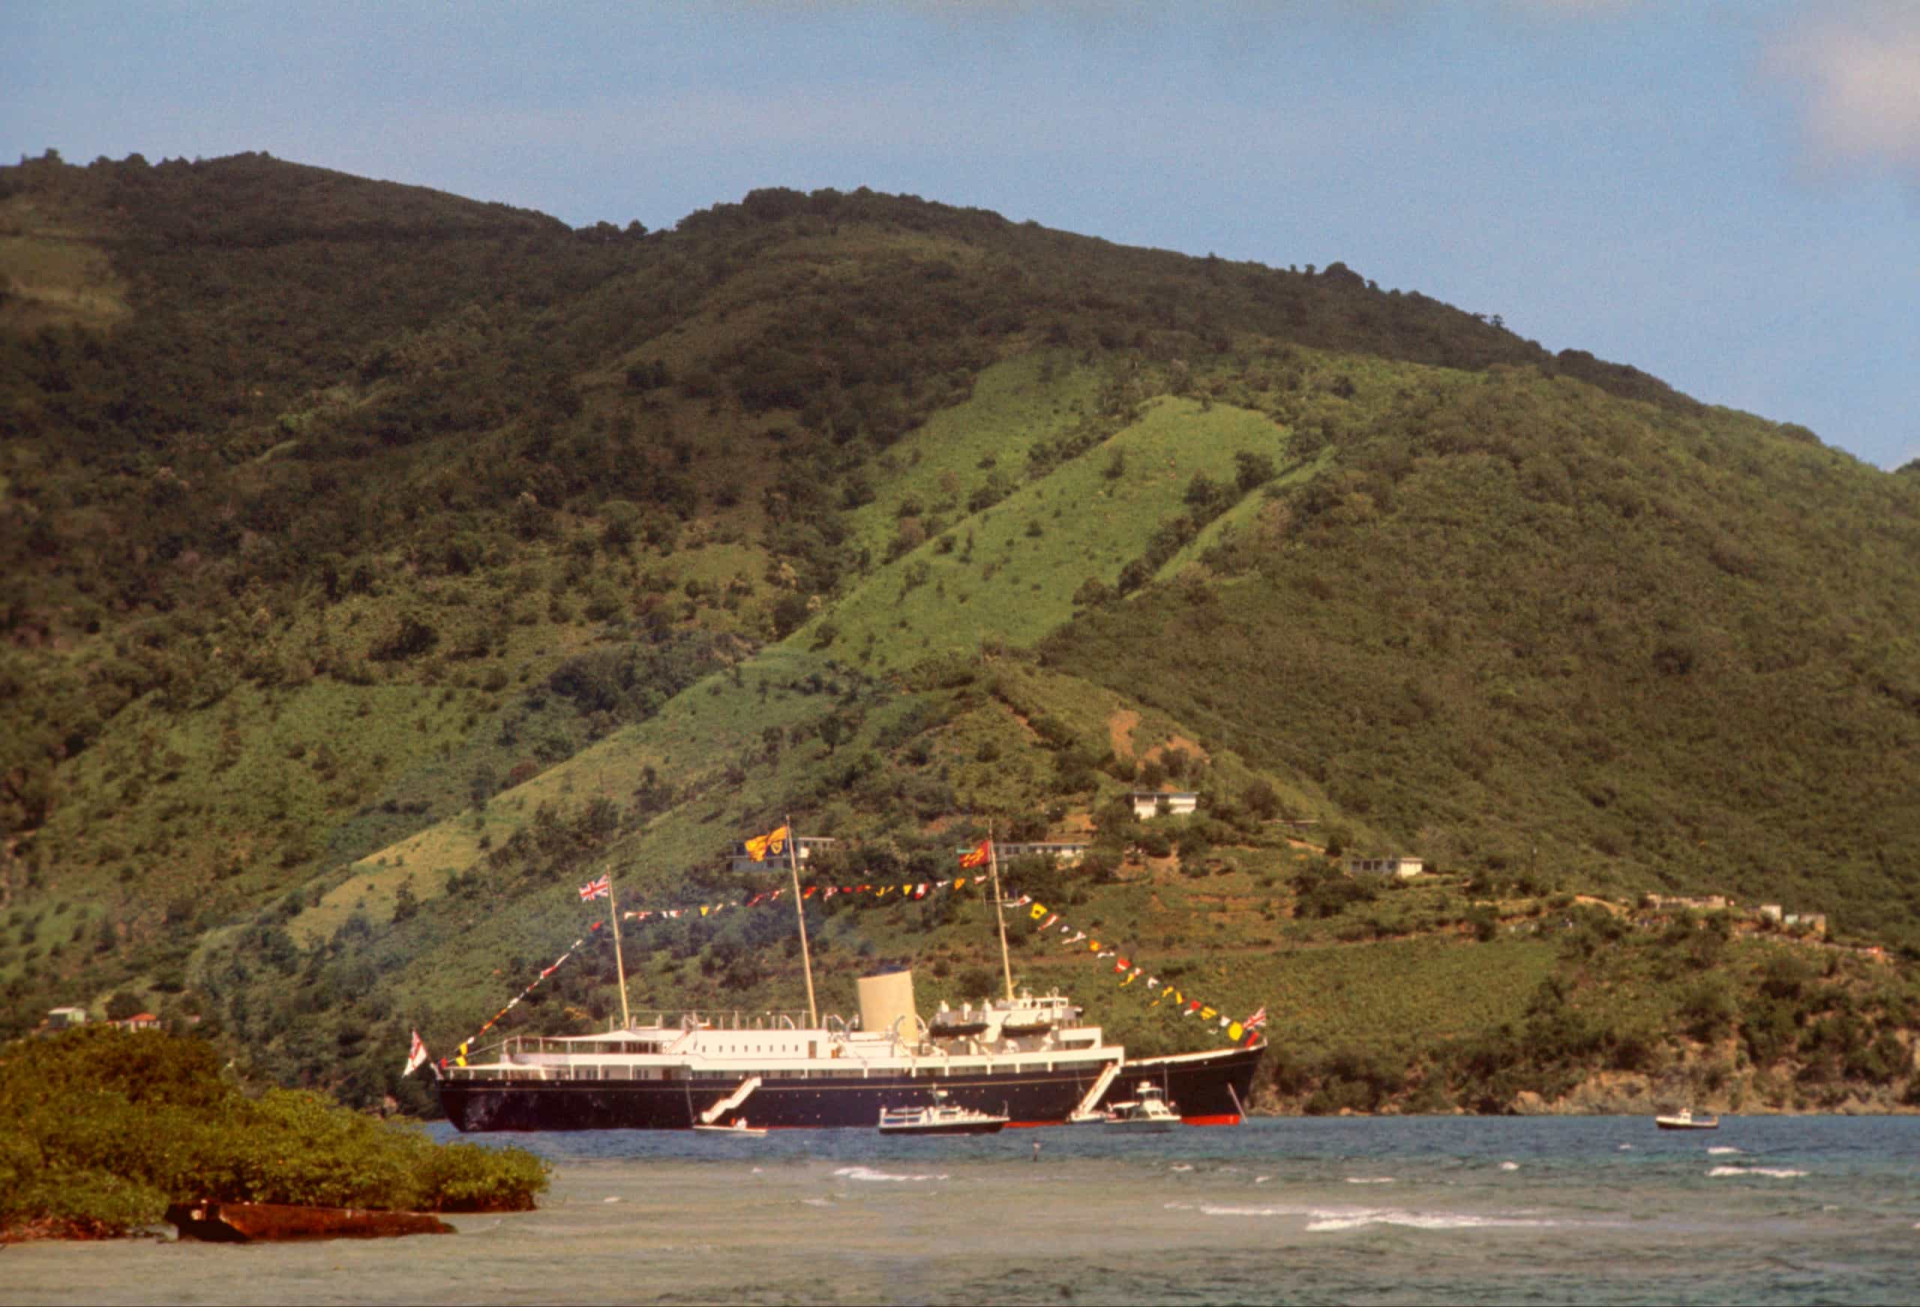 <p>In October 1977, the Royal Yacht <em>Britannia</em> anchored off Road Harbor during Queen Elizabeth II's visit to the British Virgin Islands as part of her Silver Jubilee tour of the Caribbean.</p><p>You may also like:<a href="https://www.starsinsider.com/n/350323?utm_source=msn.com&utm_medium=display&utm_campaign=referral_description&utm_content=474709v3en-sg"> Celebs reveal the stories behind their stage names</a></p>